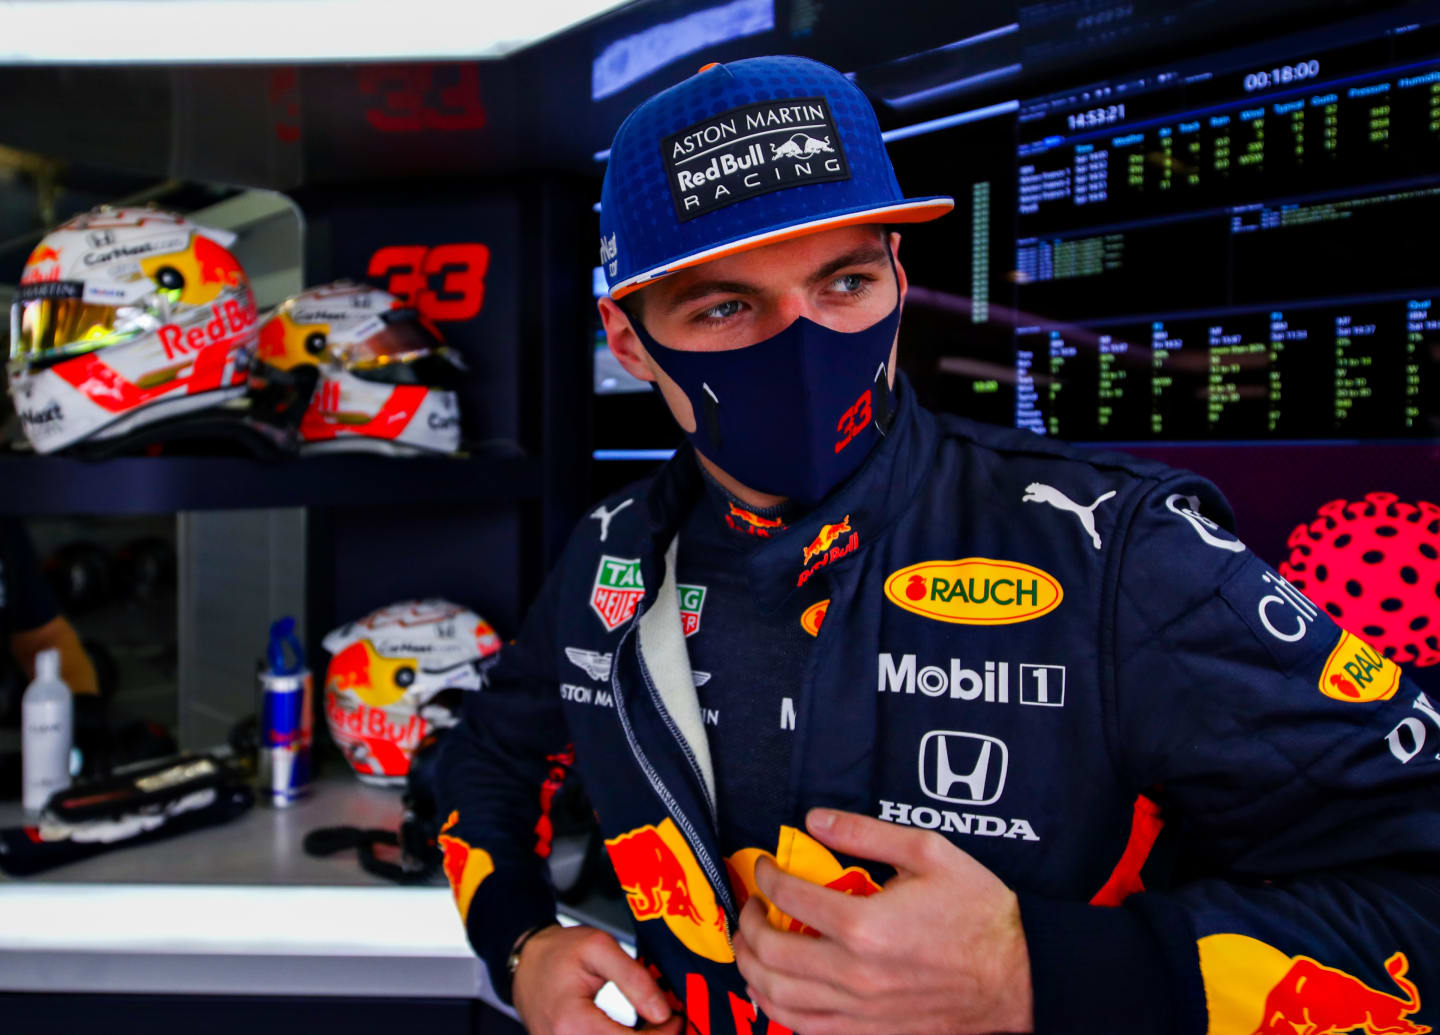 NUERBURG, GERMANY - OCTOBER 10: Max Verstappen of Netherlands and Red Bull Racing prepares to drive in the garage during qualifying ahead of the F1 Eifel Grand Prix at Nuerburgring on October 10, 2020 in Nuerburg, Germany. (Photo by Mark Thompson/Getty Images)